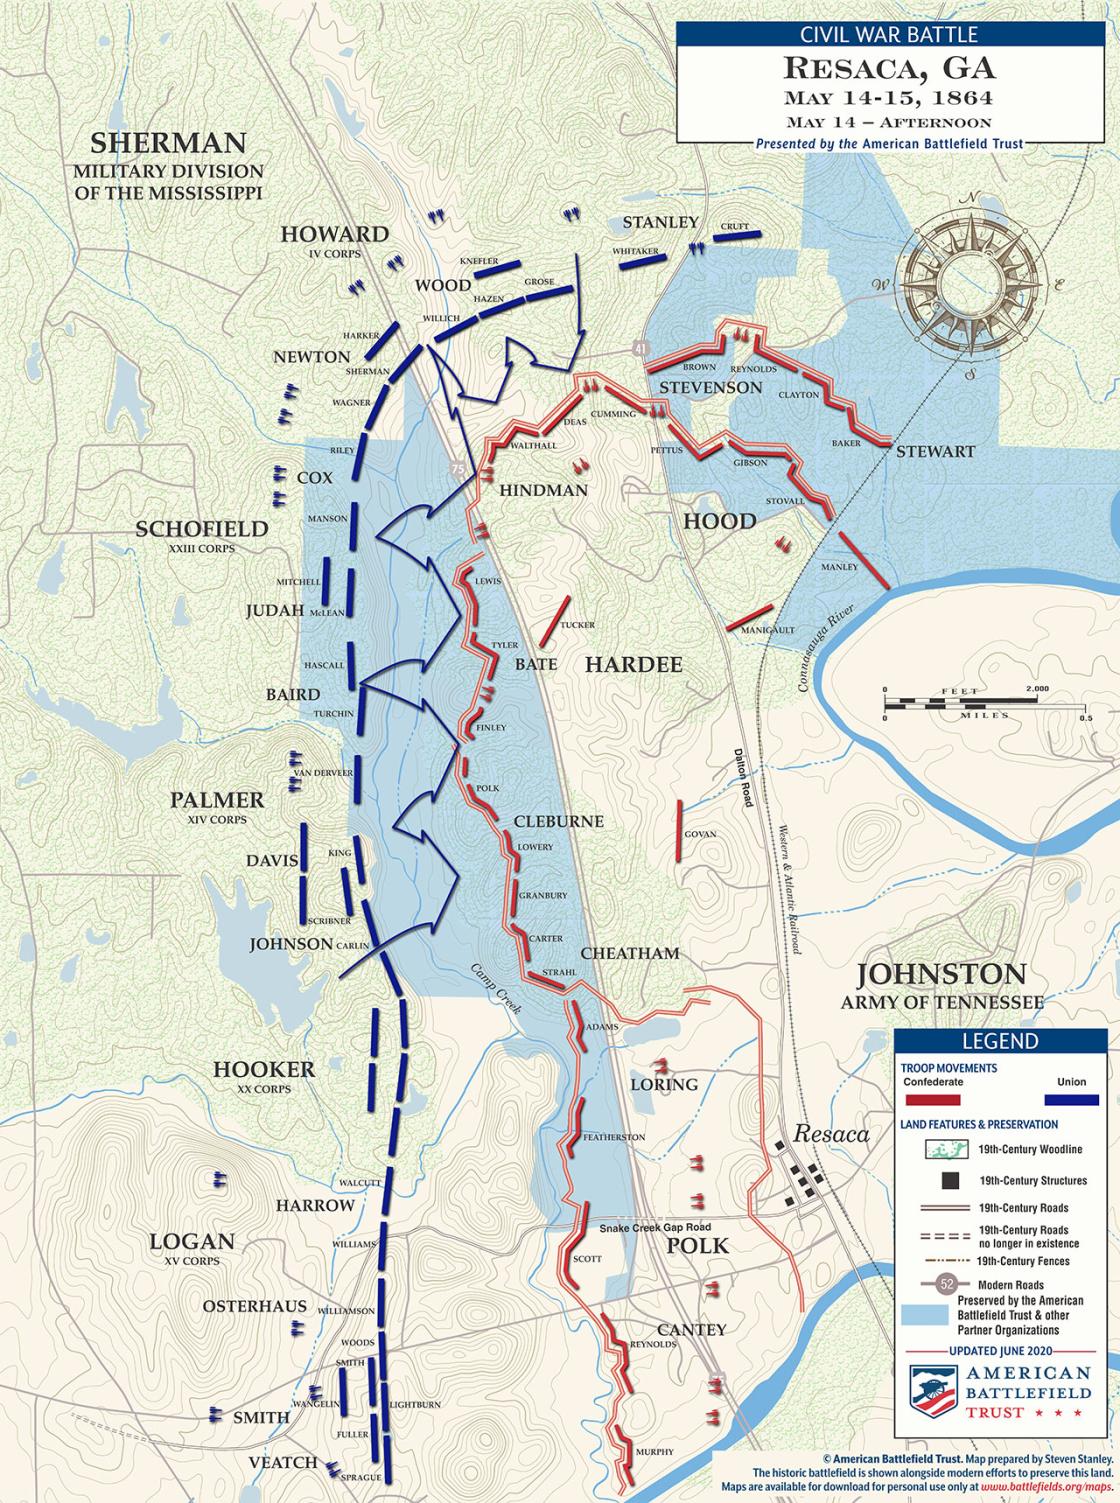 Resaca - May 14, 1864 - Afternoon Battle Map